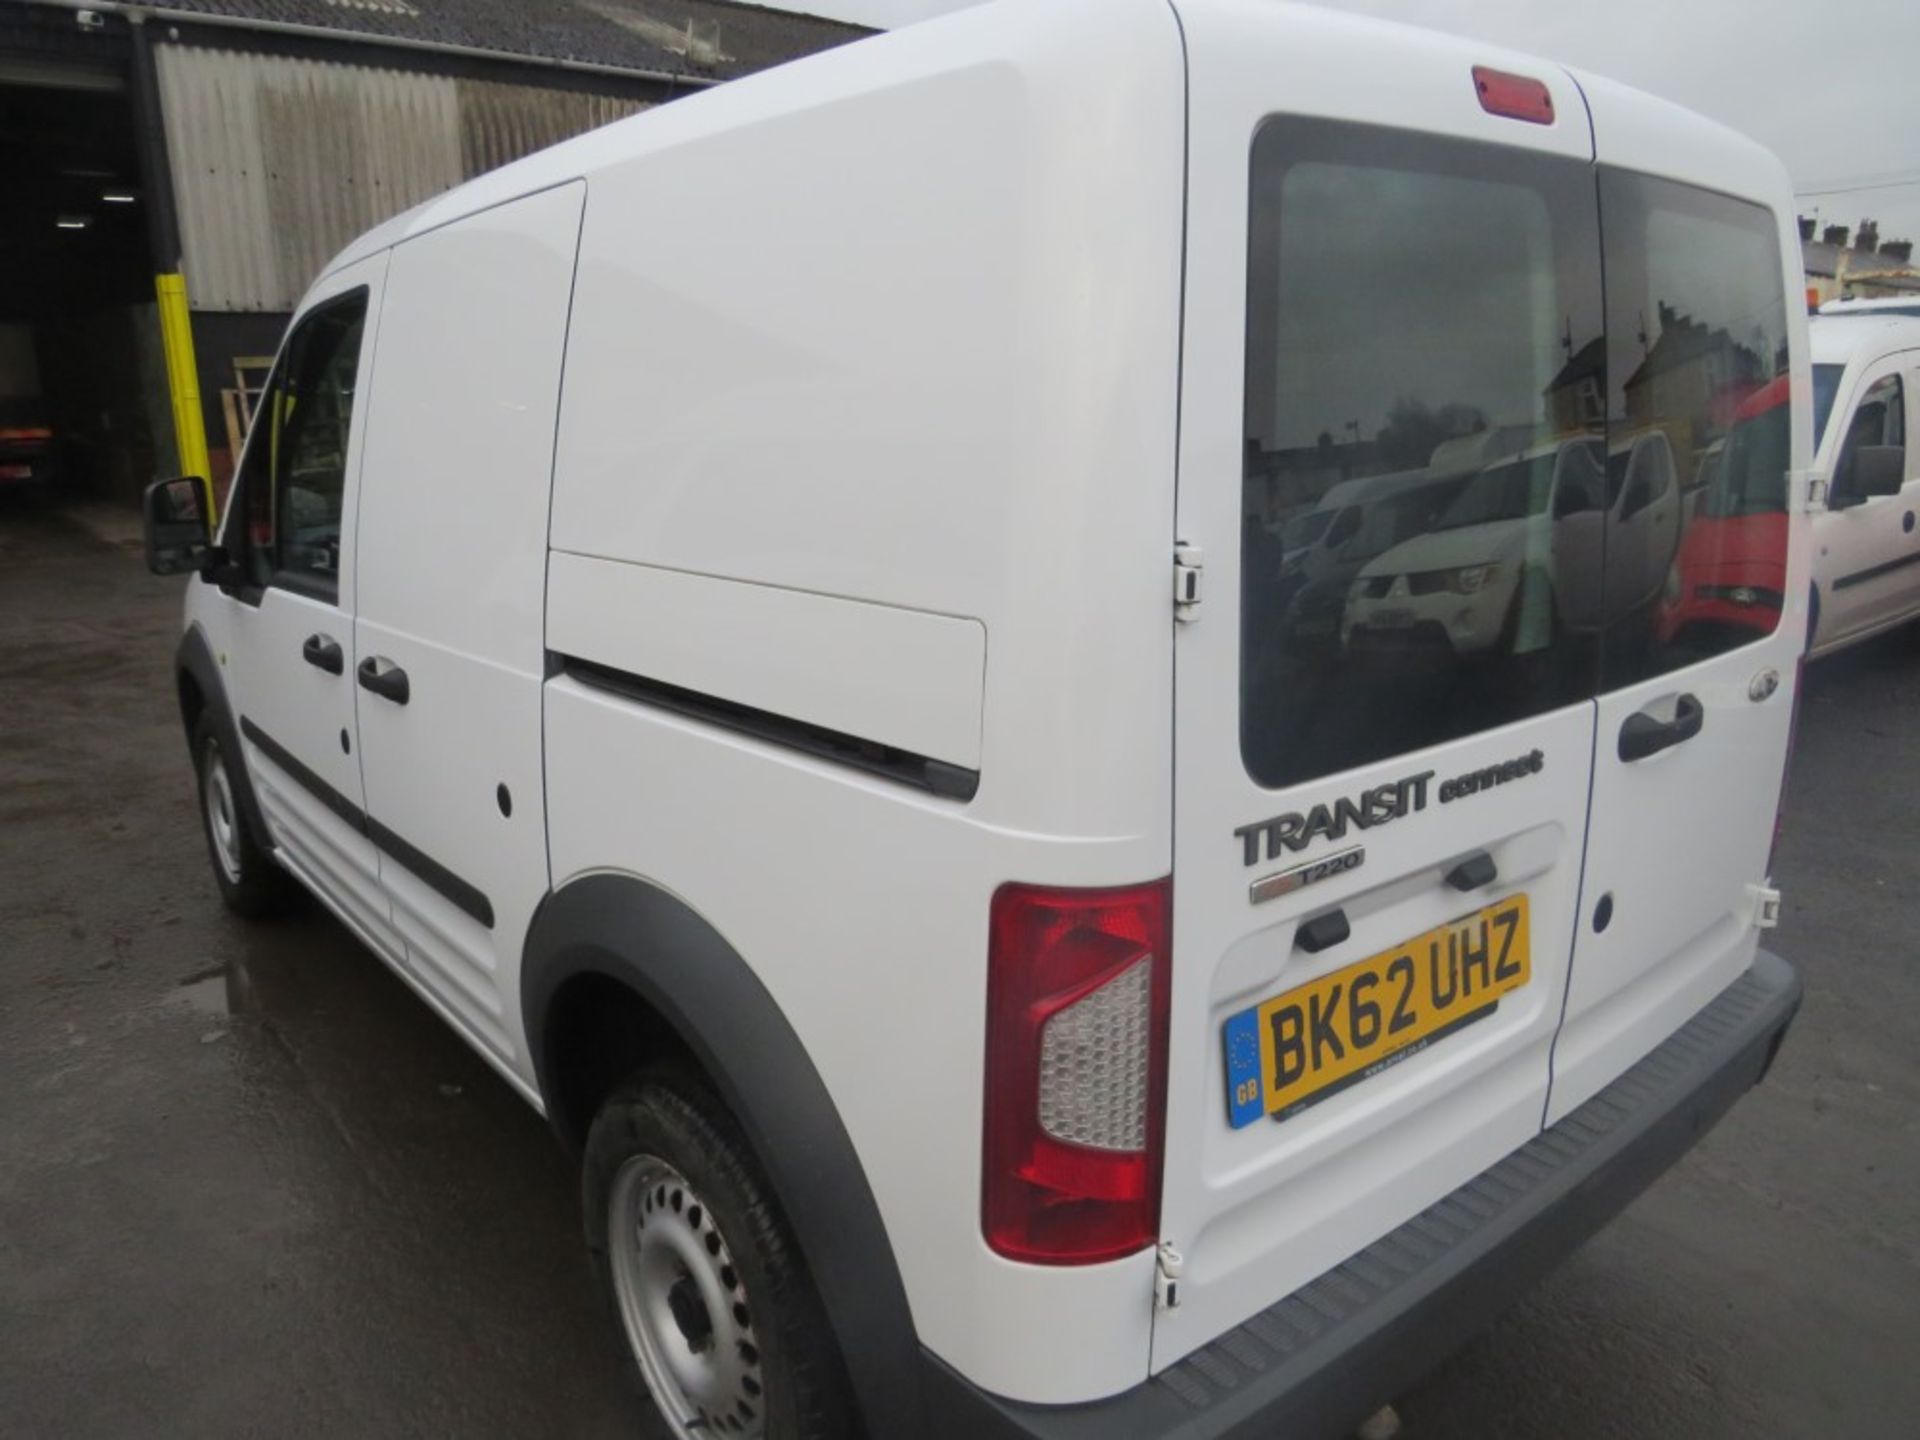 62 reg FORD TRANSIT CONNECT T220 CREW VAN, 1ST REG 10/12, 100065M WARRANTED, V5 HERE, 1 OWNER FROM - Image 3 of 7